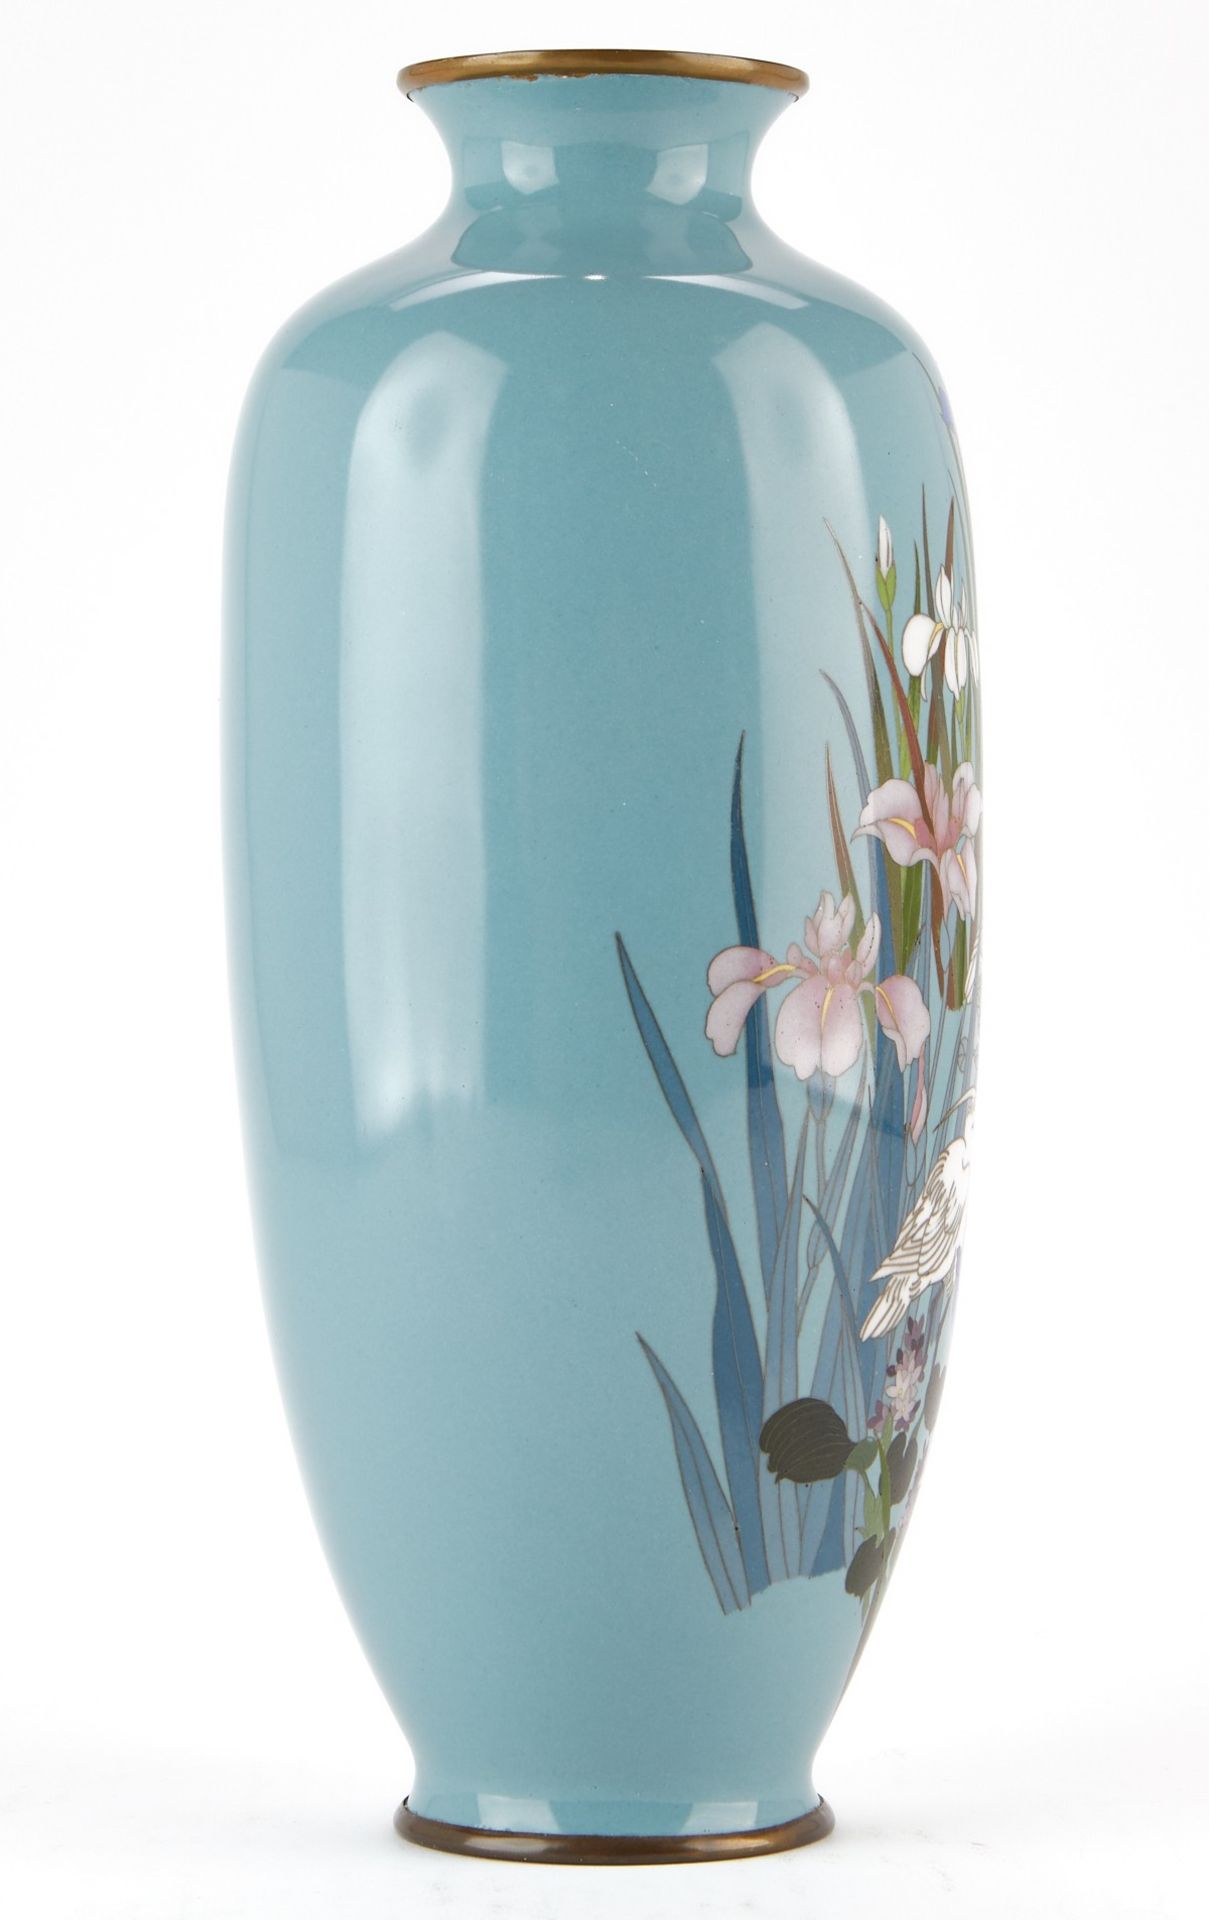 Japanese Cloisonne Vase Cranes and Flowers - Image 2 of 7